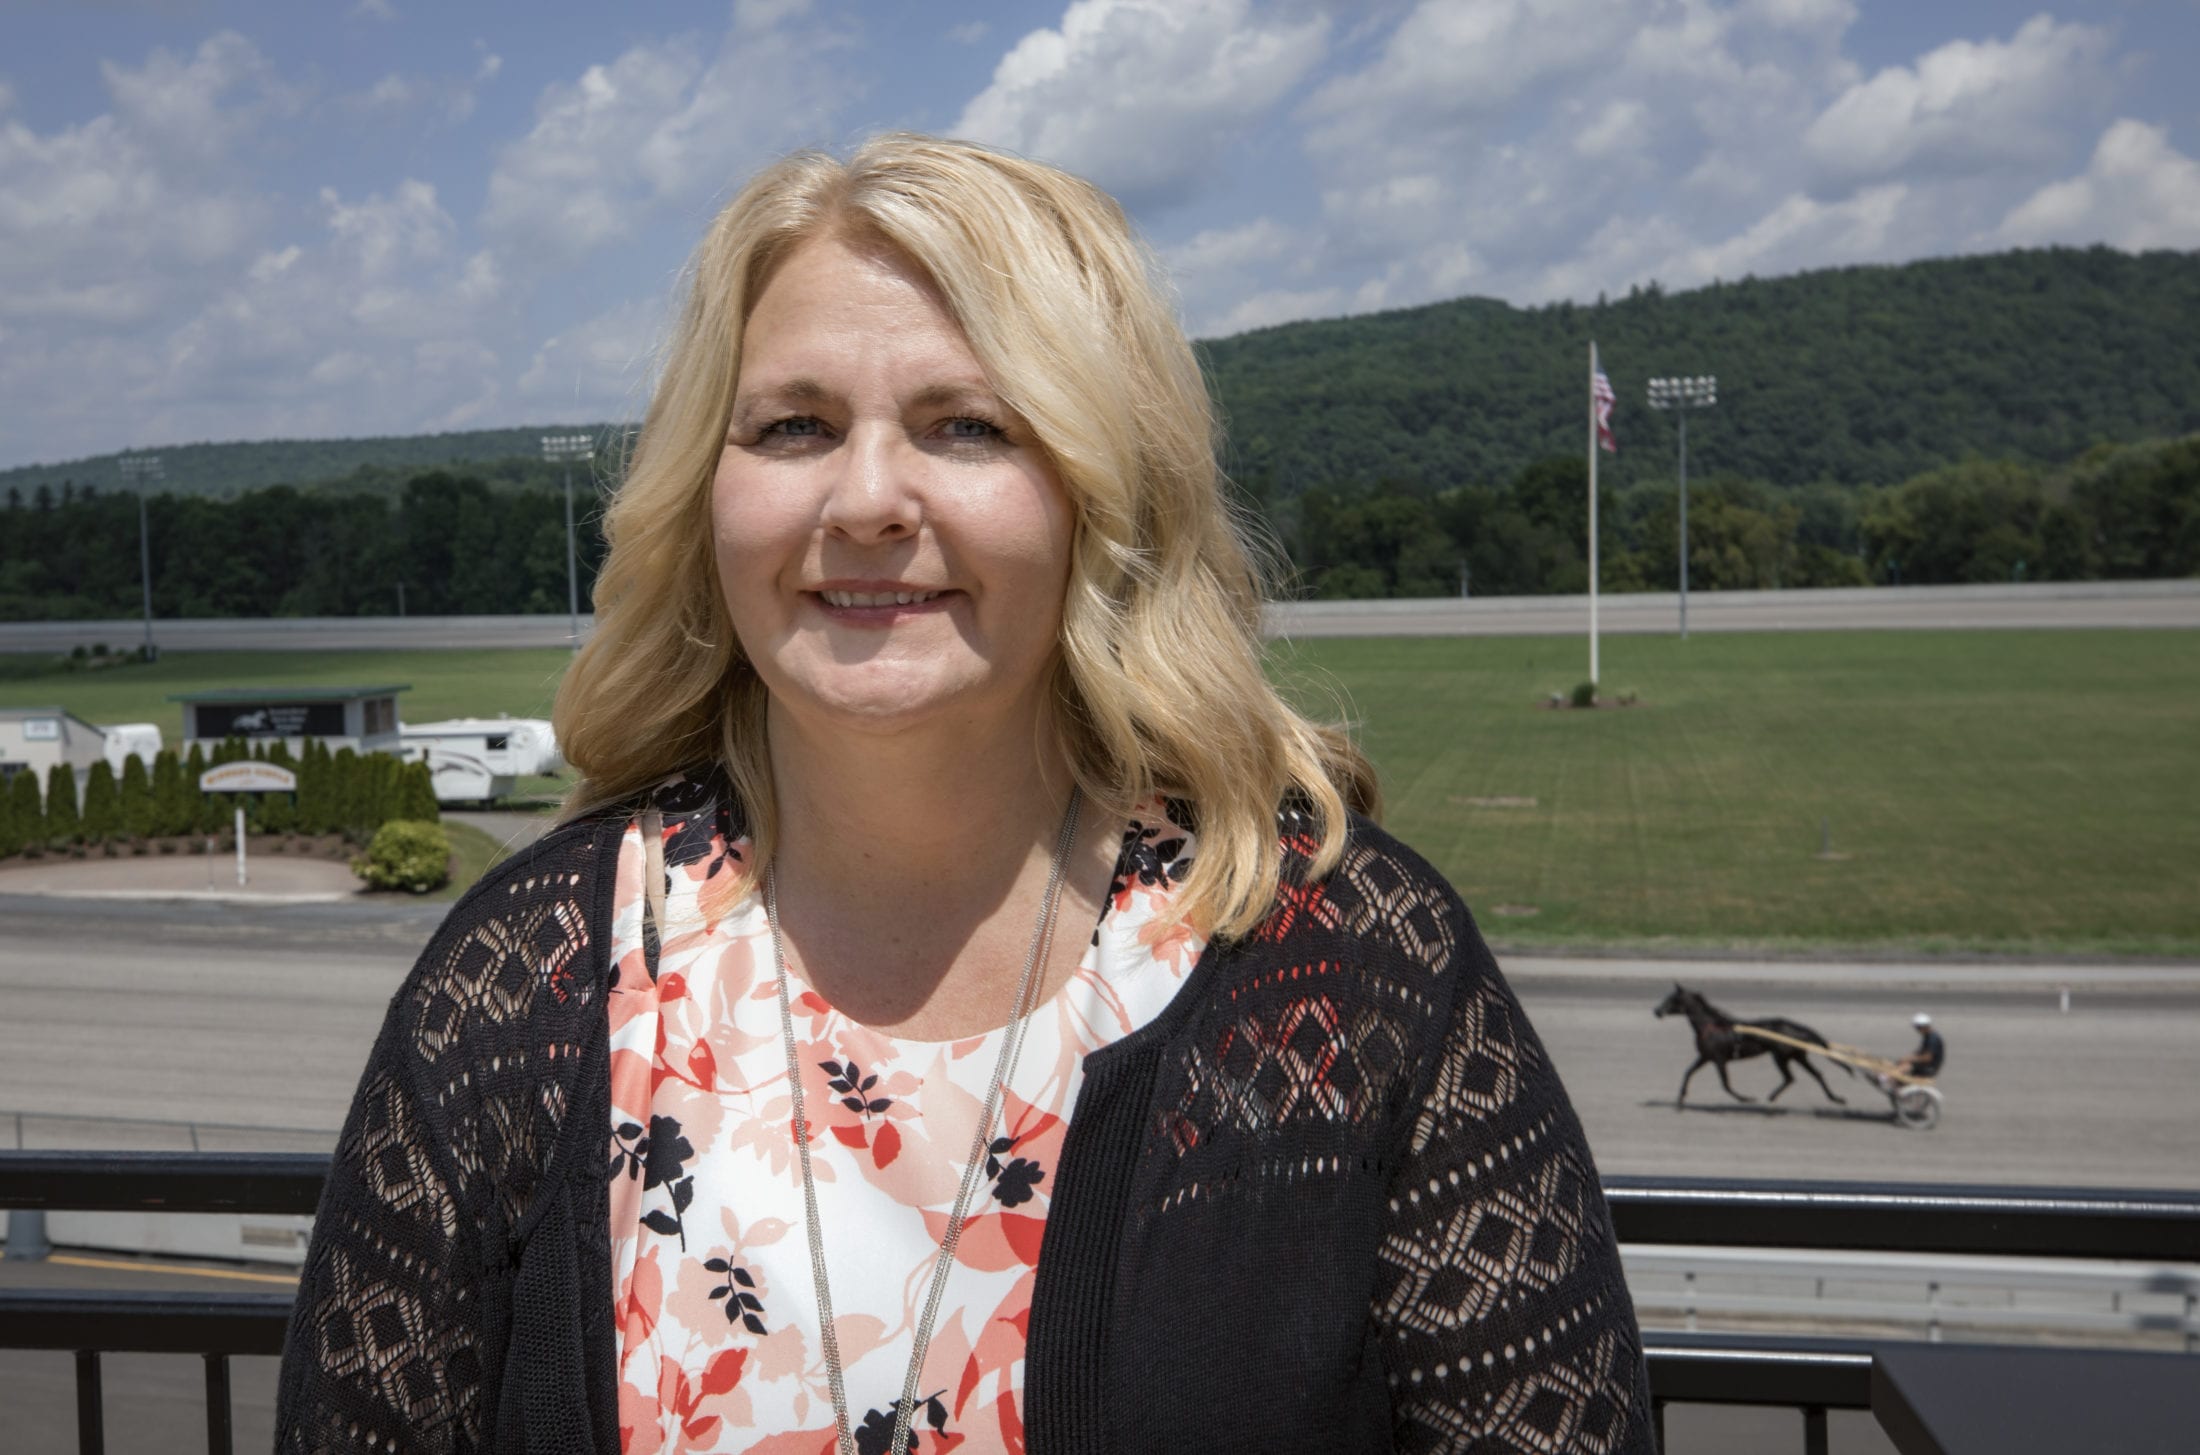 Focus on Tioga Downs: From SUNY Broome to the head of HR